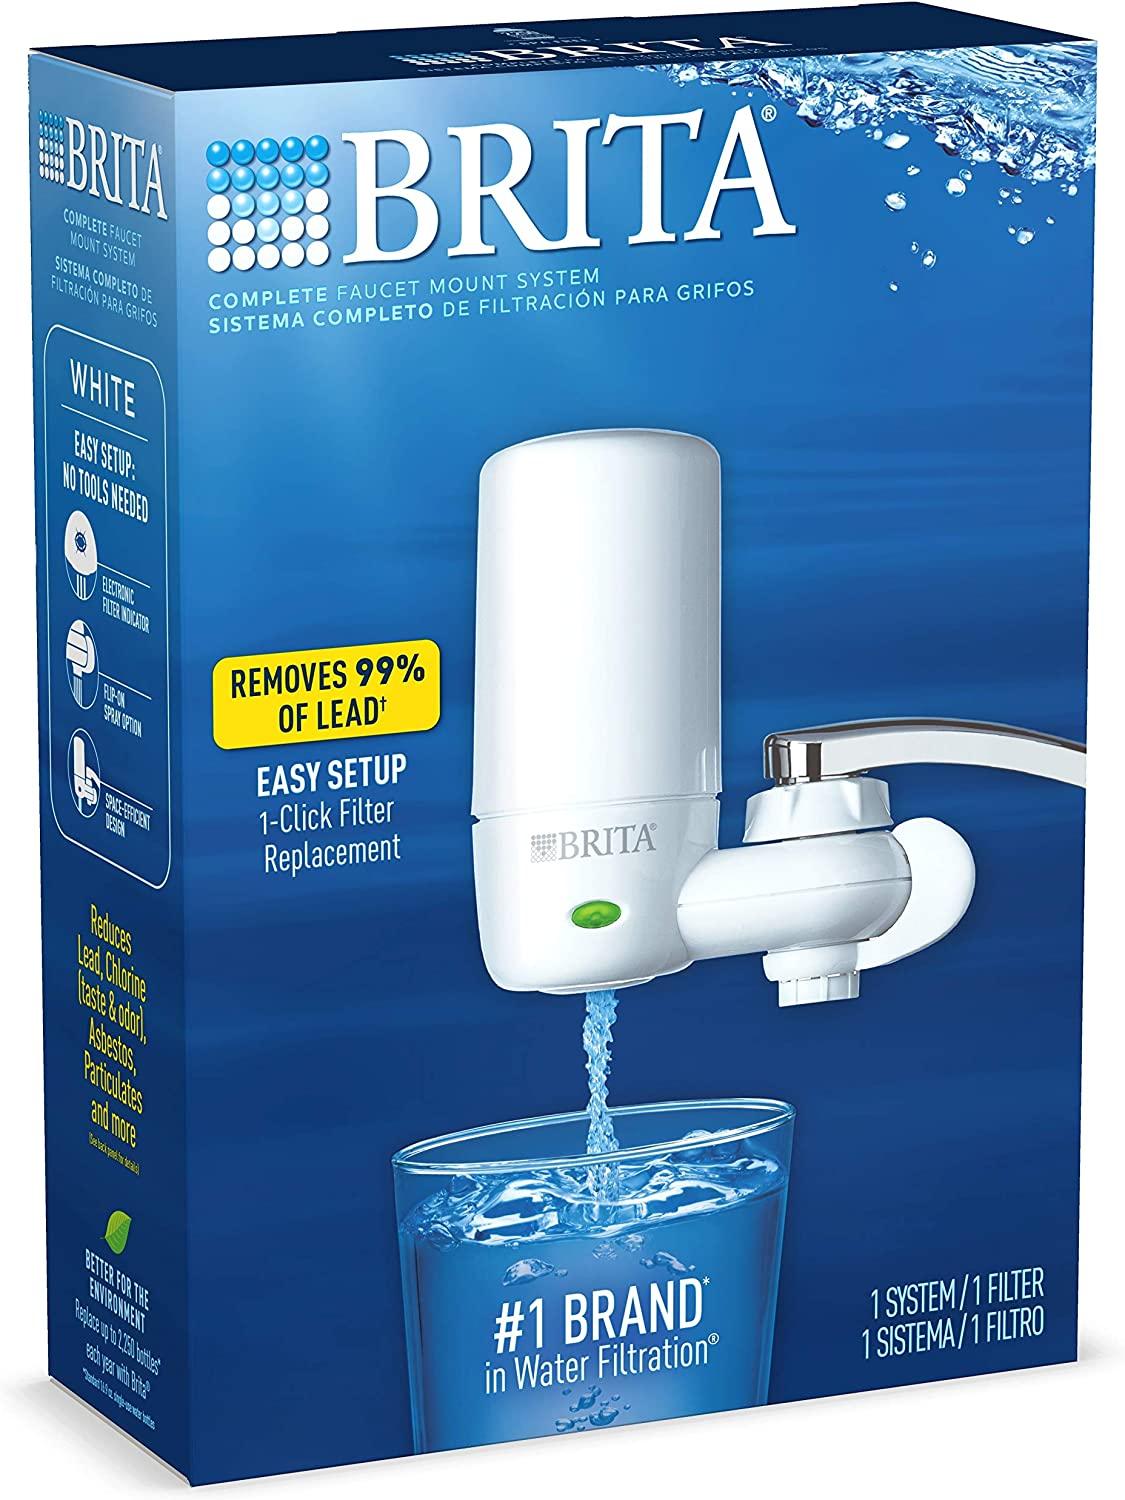 This Brita Faucet Mount Filters Water Straight From The Tap